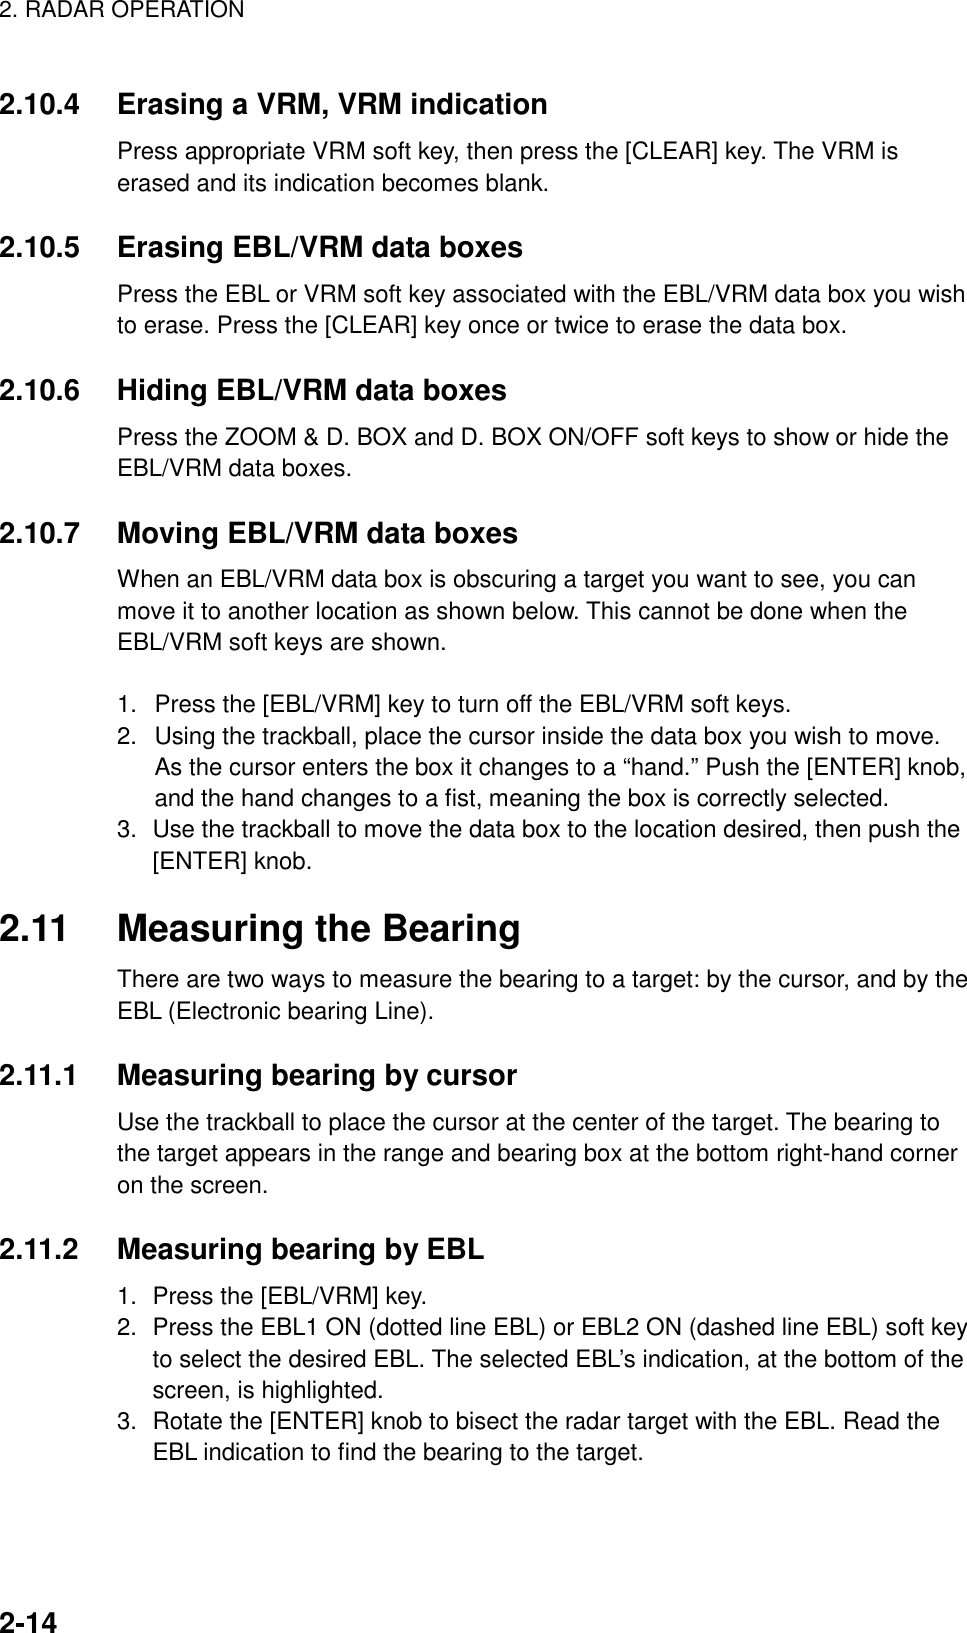 2. RADAR OPERATION    2-142.10.4  Erasing a VRM, VRM indication Press appropriate VRM soft key, then press the [CLEAR] key. The VRM is erased and its indication becomes blank.  2.10.5  Erasing EBL/VRM data boxes Press the EBL or VRM soft key associated with the EBL/VRM data box you wish to erase. Press the [CLEAR] key once or twice to erase the data box.  2.10.6  Hiding EBL/VRM data boxes Press the ZOOM &amp; D. BOX and D. BOX ON/OFF soft keys to show or hide the EBL/VRM data boxes.  2.10.7  Moving EBL/VRM data boxes When an EBL/VRM data box is obscuring a target you want to see, you can move it to another location as shown below. This cannot be done when the EBL/VRM soft keys are shown.  1.  Press the [EBL/VRM] key to turn off the EBL/VRM soft keys. 2.  Using the trackball, place the cursor inside the data box you wish to move. As the cursor enters the box it changes to a “hand.” Push the [ENTER] knob, and the hand changes to a fist, meaning the box is correctly selected. 3.  Use the trackball to move the data box to the location desired, then push the [ENTER] knob.    2.11  Measuring the Bearing There are two ways to measure the bearing to a target: by the cursor, and by the EBL (Electronic bearing Line).    2.11.1  Measuring bearing by cursor Use the trackball to place the cursor at the center of the target. The bearing to the target appears in the range and bearing box at the bottom right-hand corner on the screen.  2.11.2  Measuring bearing by EBL 1.  Press the [EBL/VRM] key. 2.  Press the EBL1 ON (dotted line EBL) or EBL2 ON (dashed line EBL) soft key to select the desired EBL. The selected EBL’s indication, at the bottom of the screen, is highlighted. 3.  Rotate the [ENTER] knob to bisect the radar target with the EBL. Read the EBL indication to find the bearing to the target.  